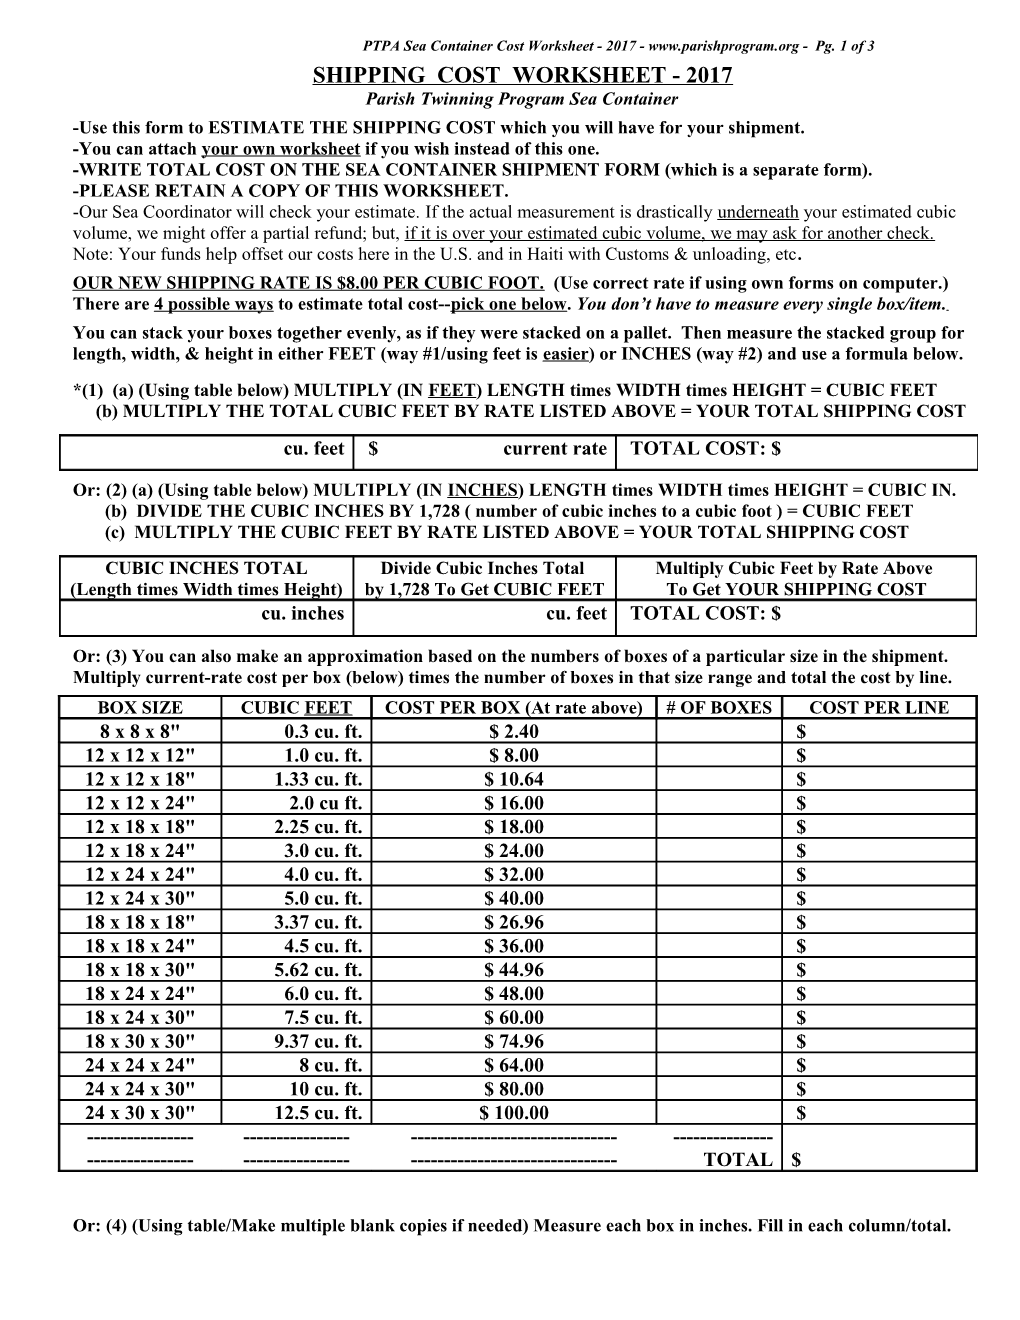 Sea Container: Shipping Cost Worksheet